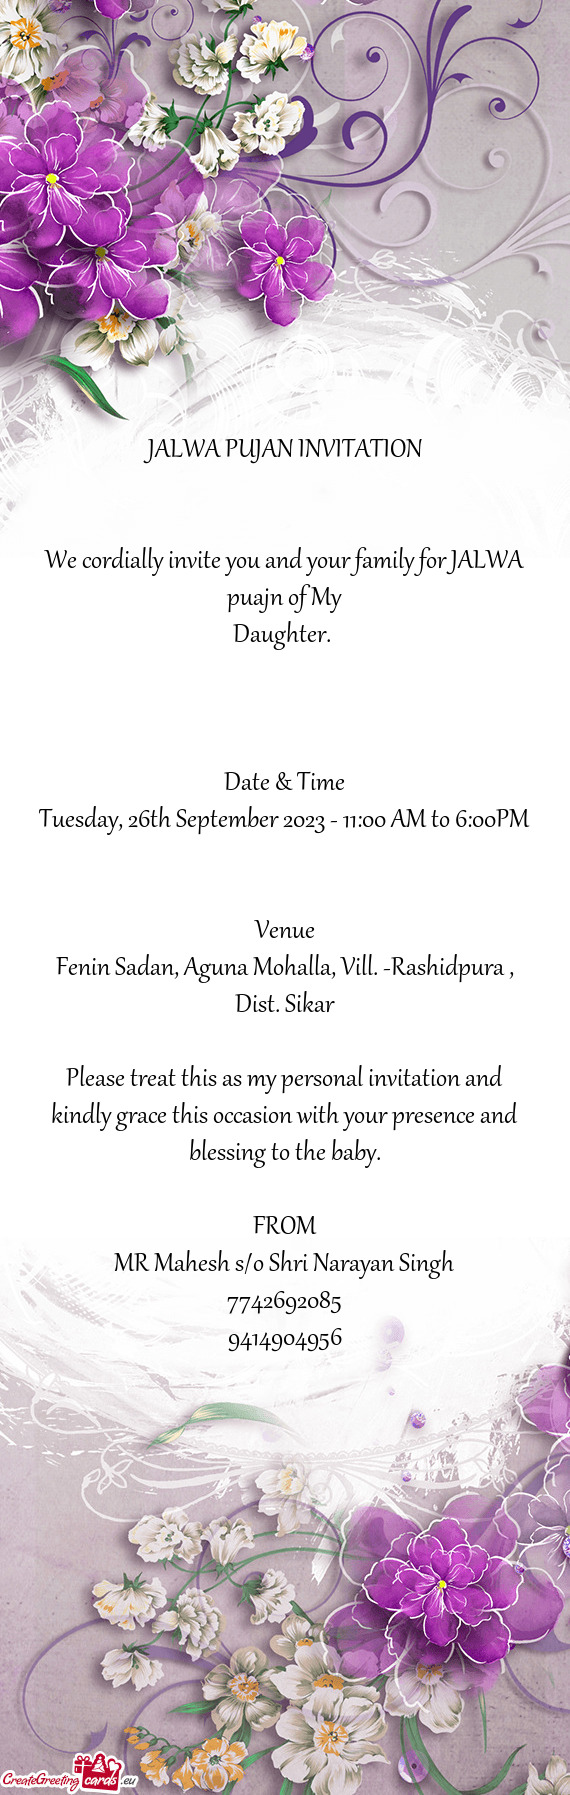 Tuesday, 26th September 2023 - 11:00 AM to 6:00PM